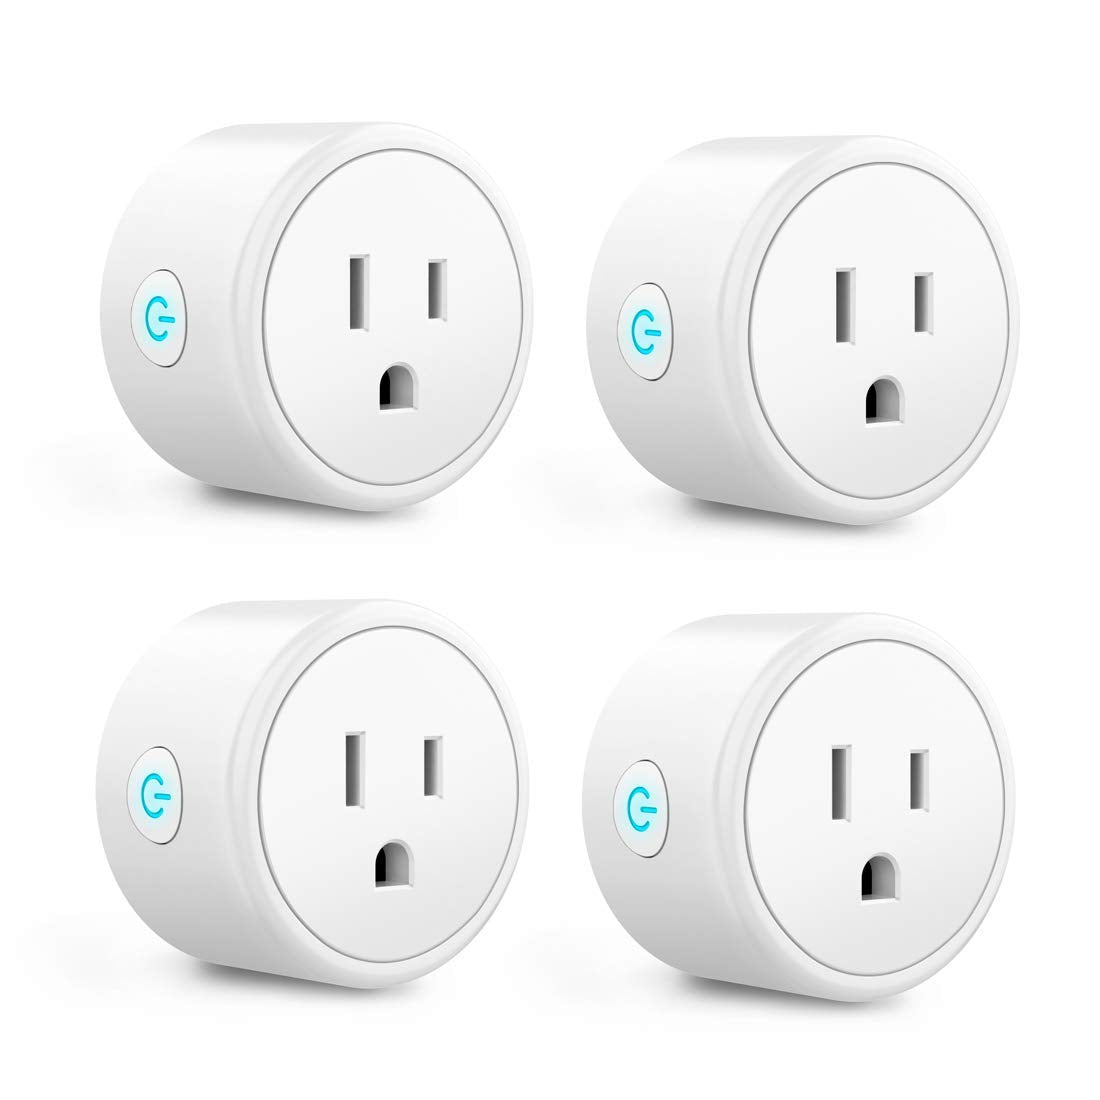 Wireless socket with timer function Mini wifi socket Wifi smart plug work with Alexa/Google home/echo/IFTTT smart life free app Remote Control &Voice Control Your Home Appliances from Anywhere